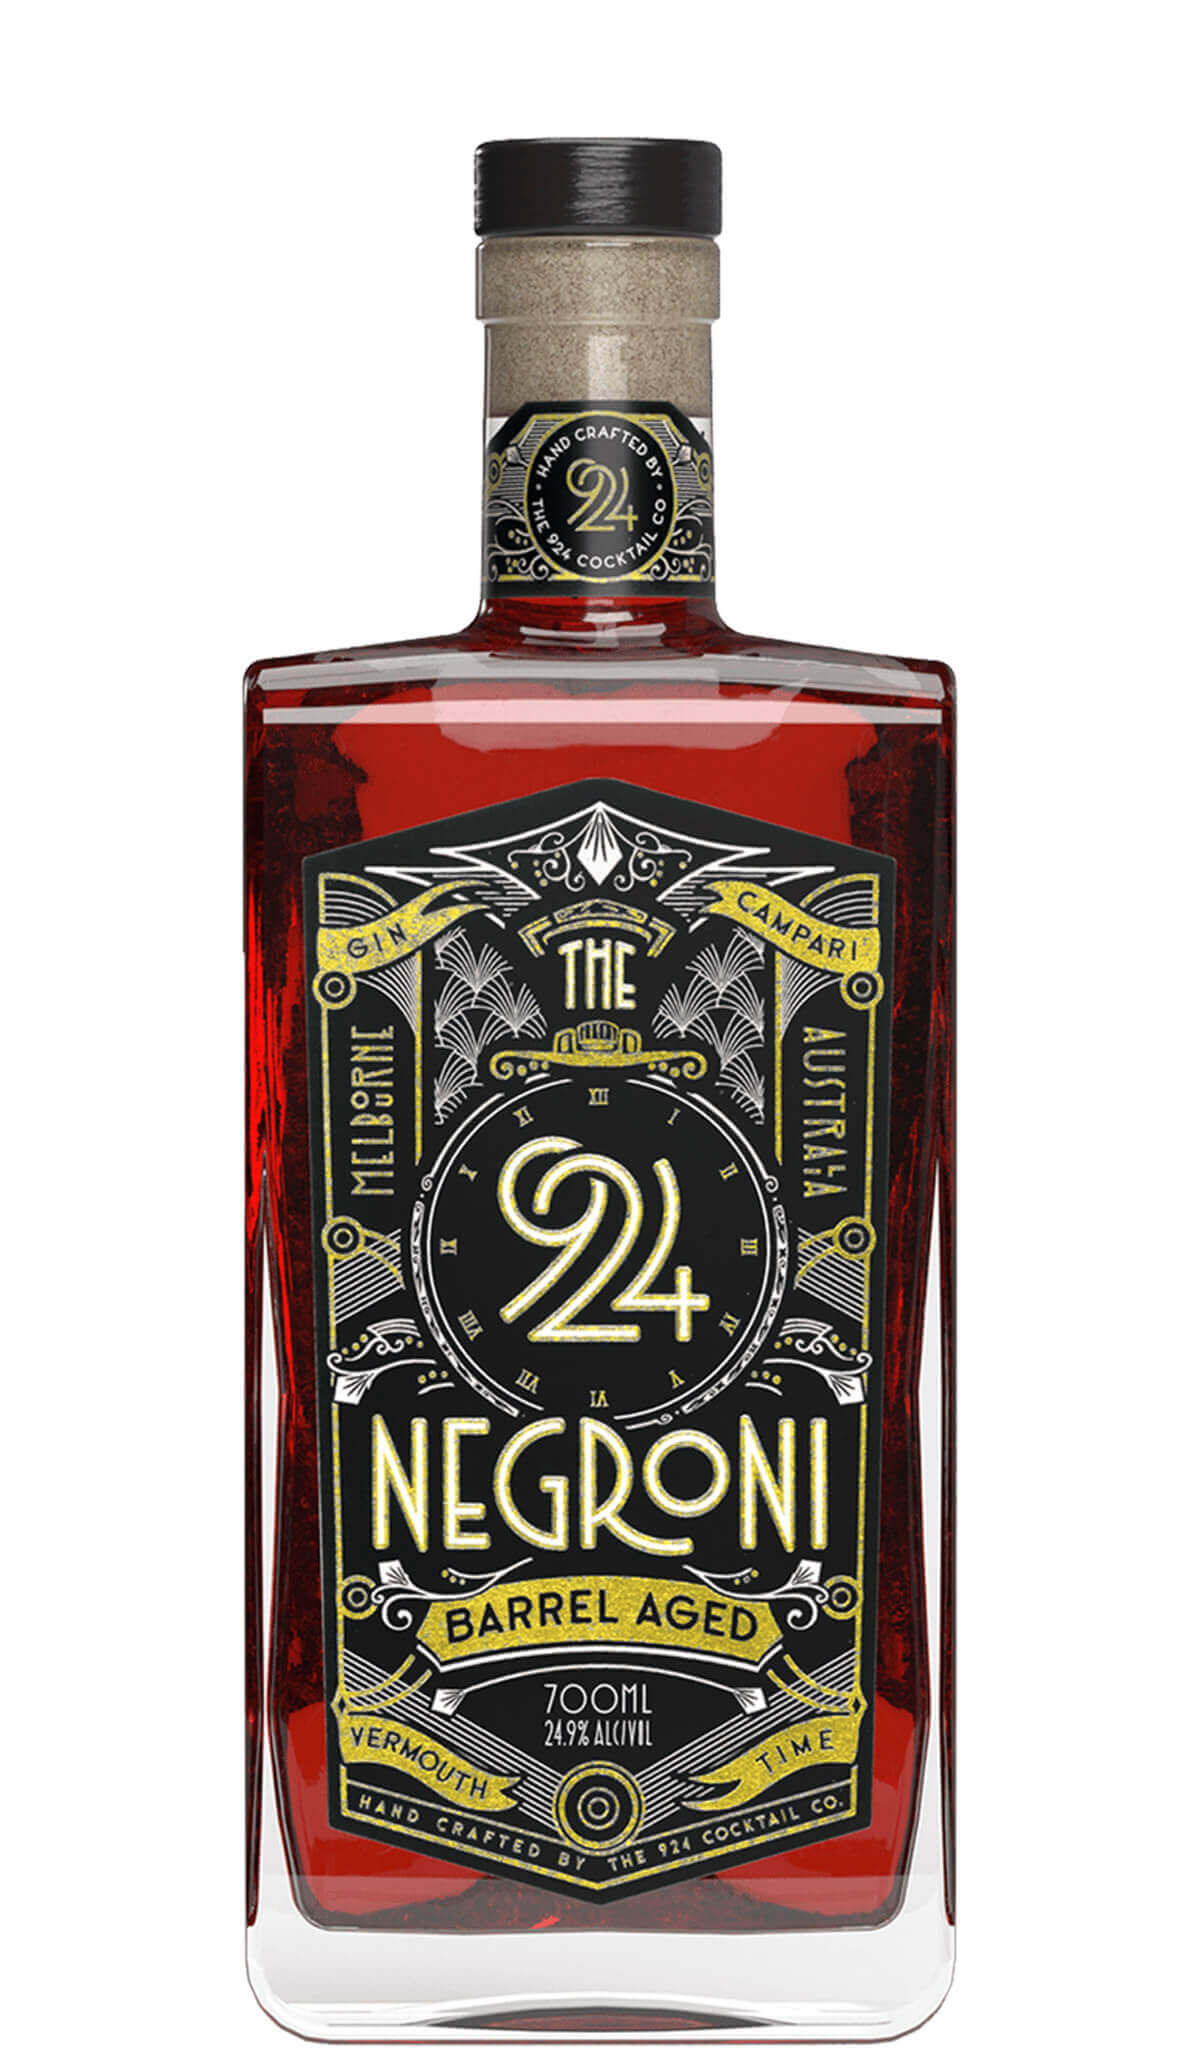 Find out more or buy 924 Negroni Barrel Aged 700ml online at Wine Sellers Direct - Australia’s independent liquor specialists.